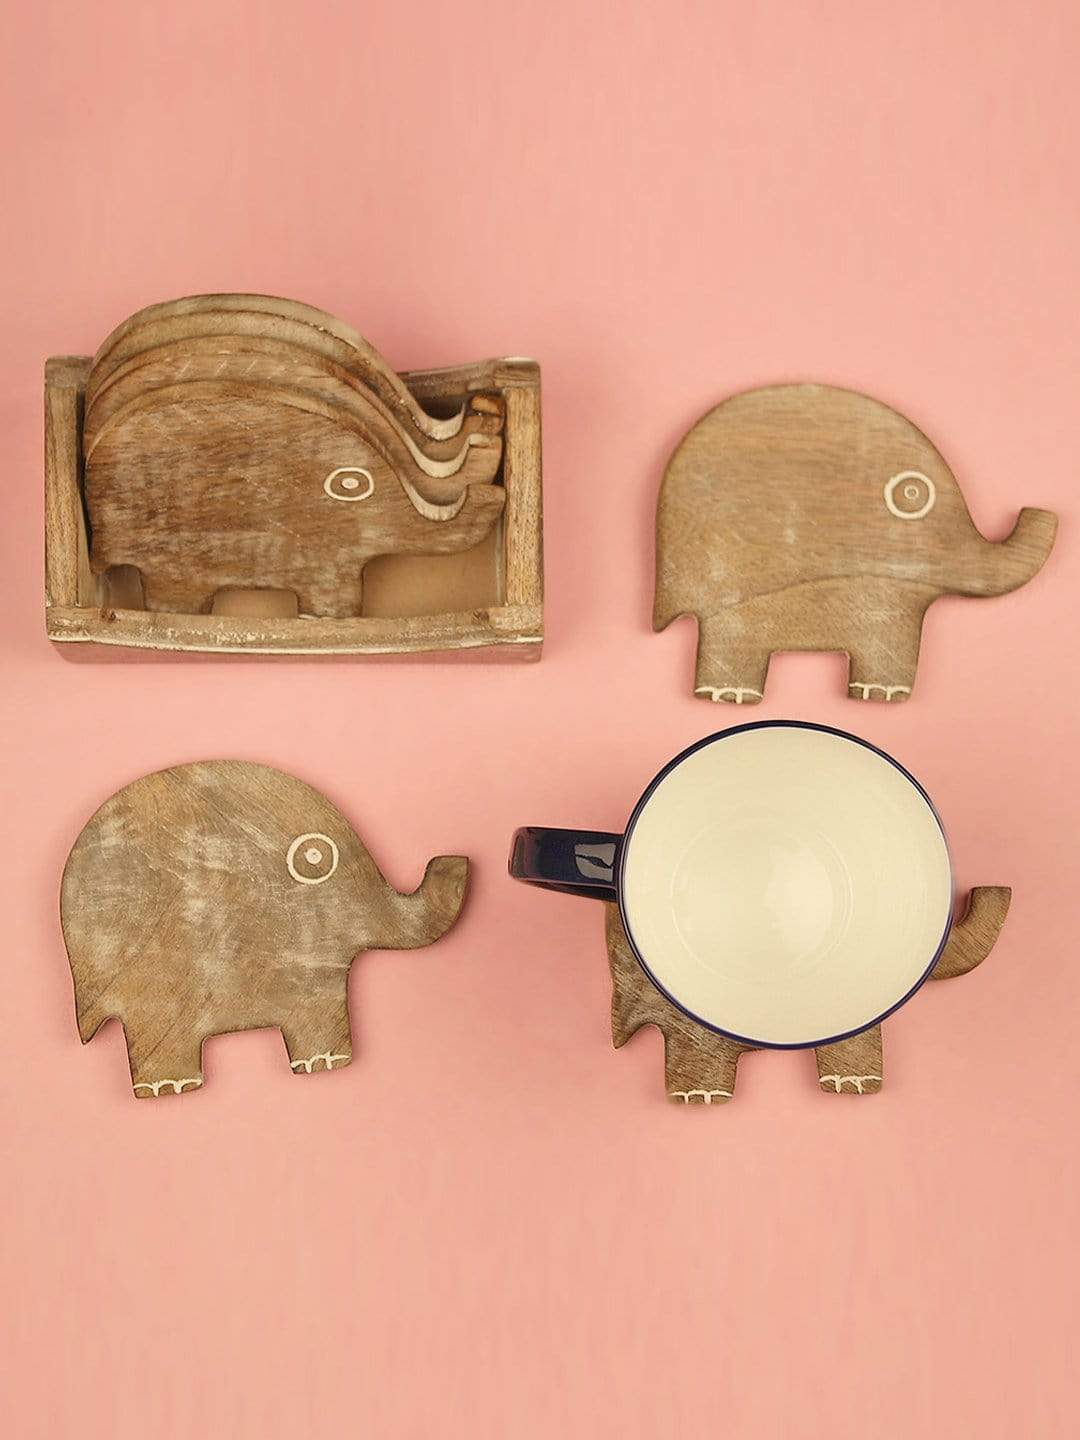 Ellie, The Elephant Coasters Set Of 6Material: MANGO WOODDimensions: 14.5 L cm X 7 W cm X 11 H cmAlways wipe up moisture promptly. Do not wash, Use a slightly damp cloth to clean. Wipe dry. Avoid draggiElephant Coasters SetThe Wishing Chair